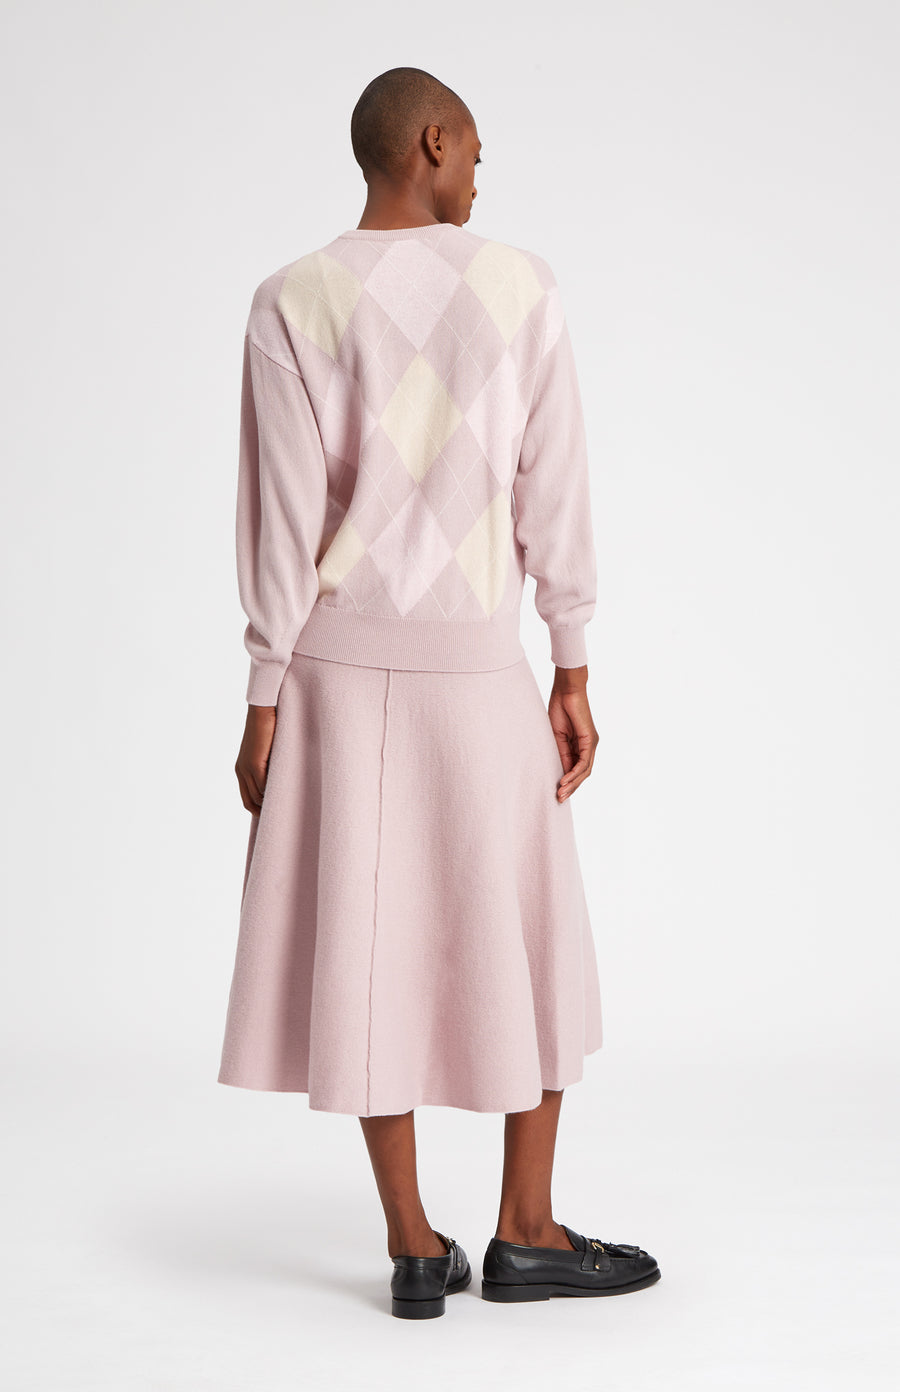 Cashmere Blend Midi Skirt In Powder Pink on model rear view - Pringle of Scotland